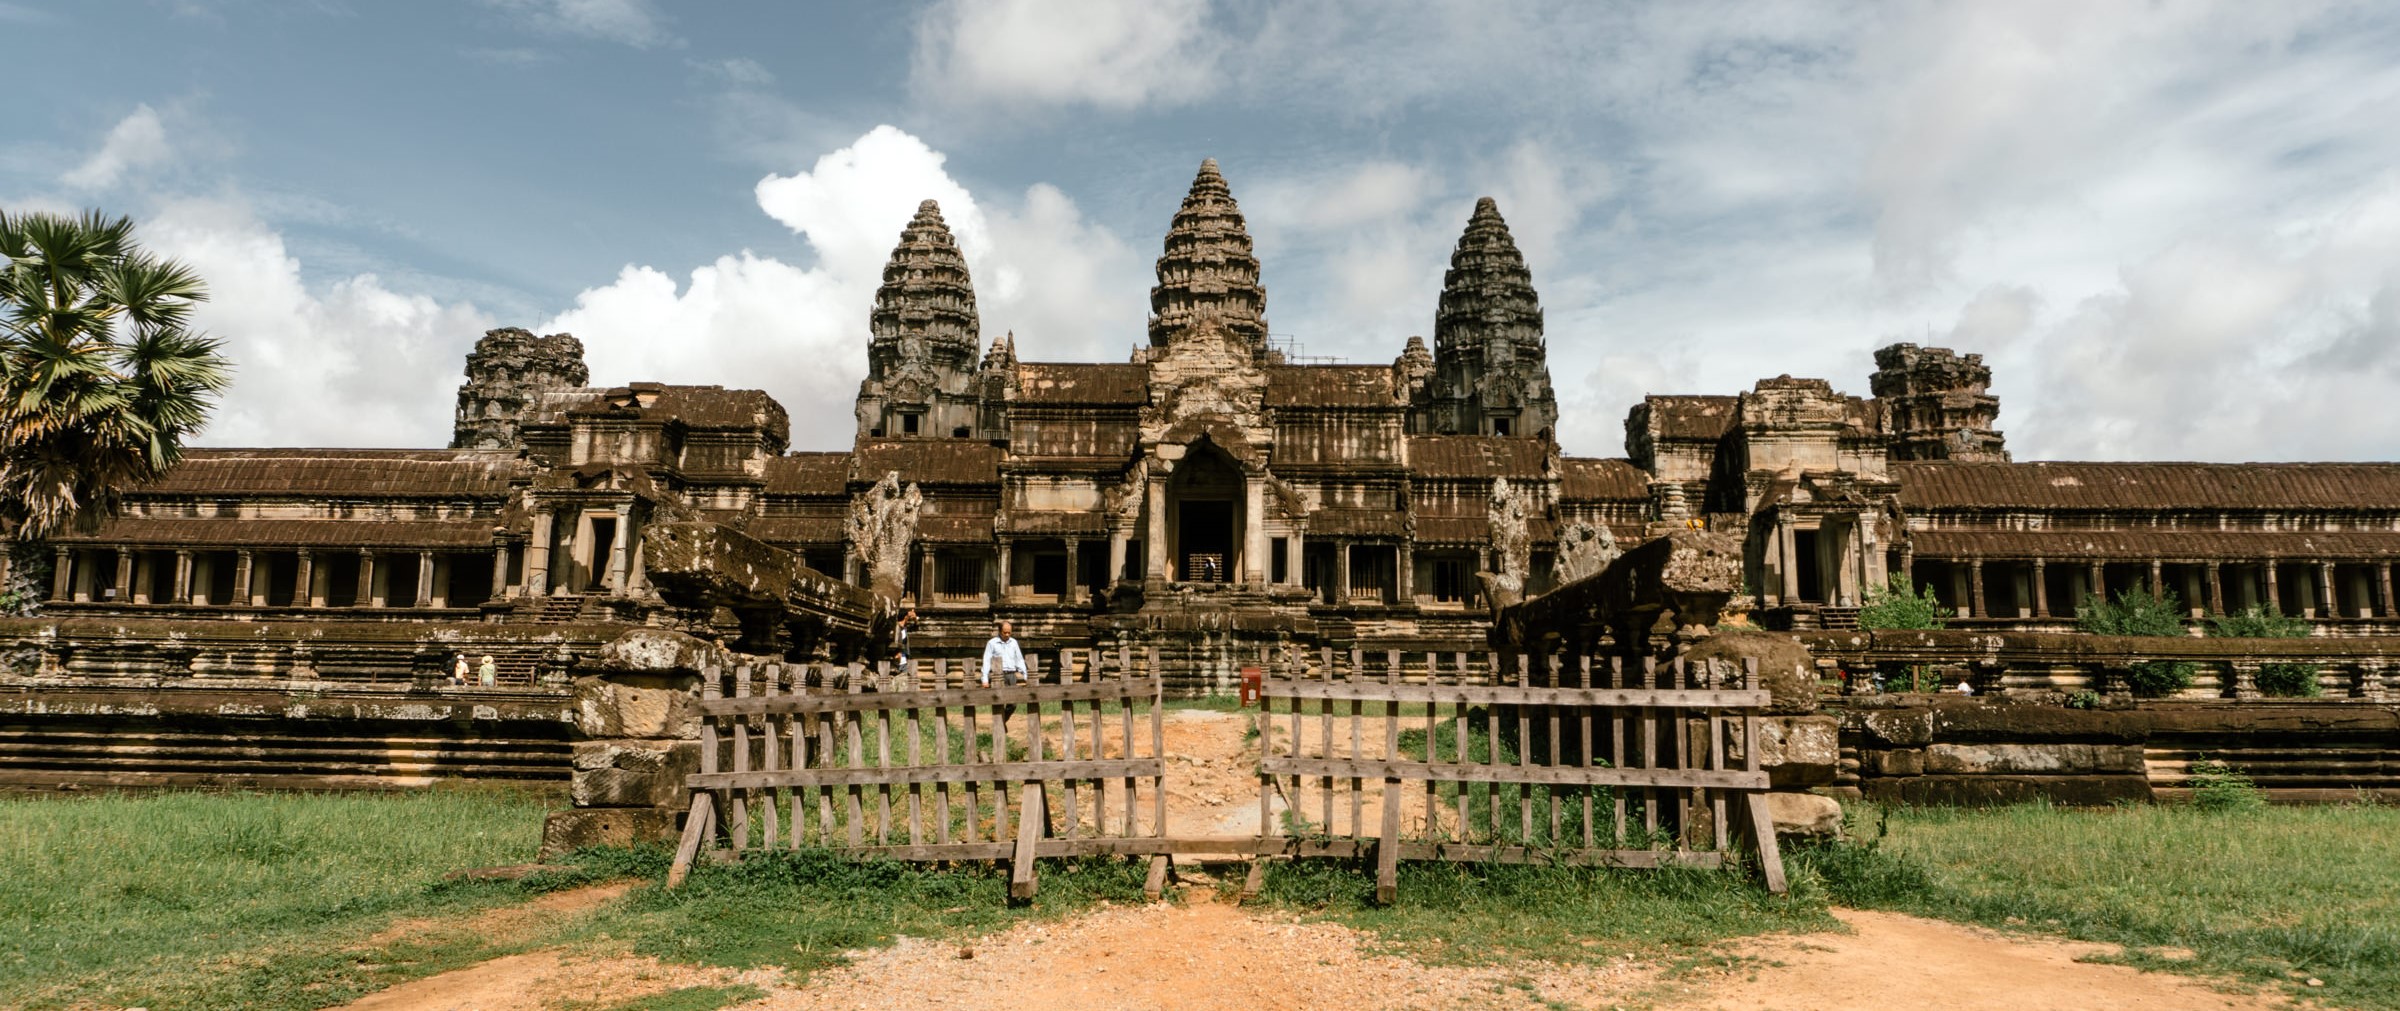 Hindu Temple Angkor Wat Complex In Cambodia Is The Worlds Largest